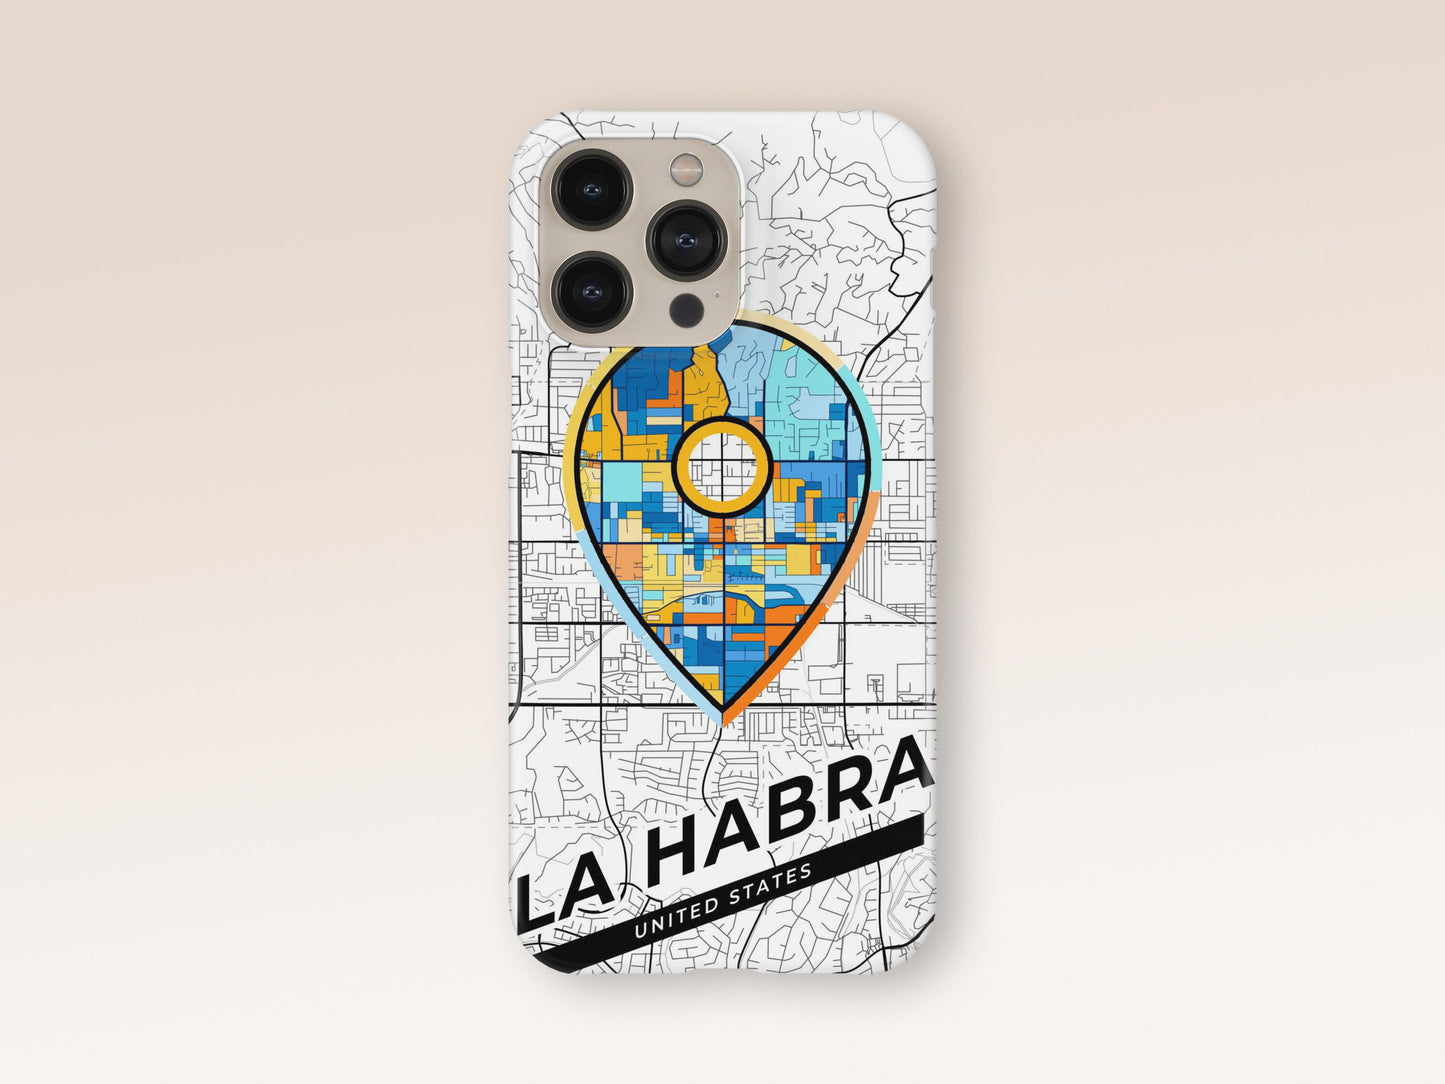 La Habra California slim phone case with colorful icon. Birthday, wedding or housewarming gift. Couple match cases. 1